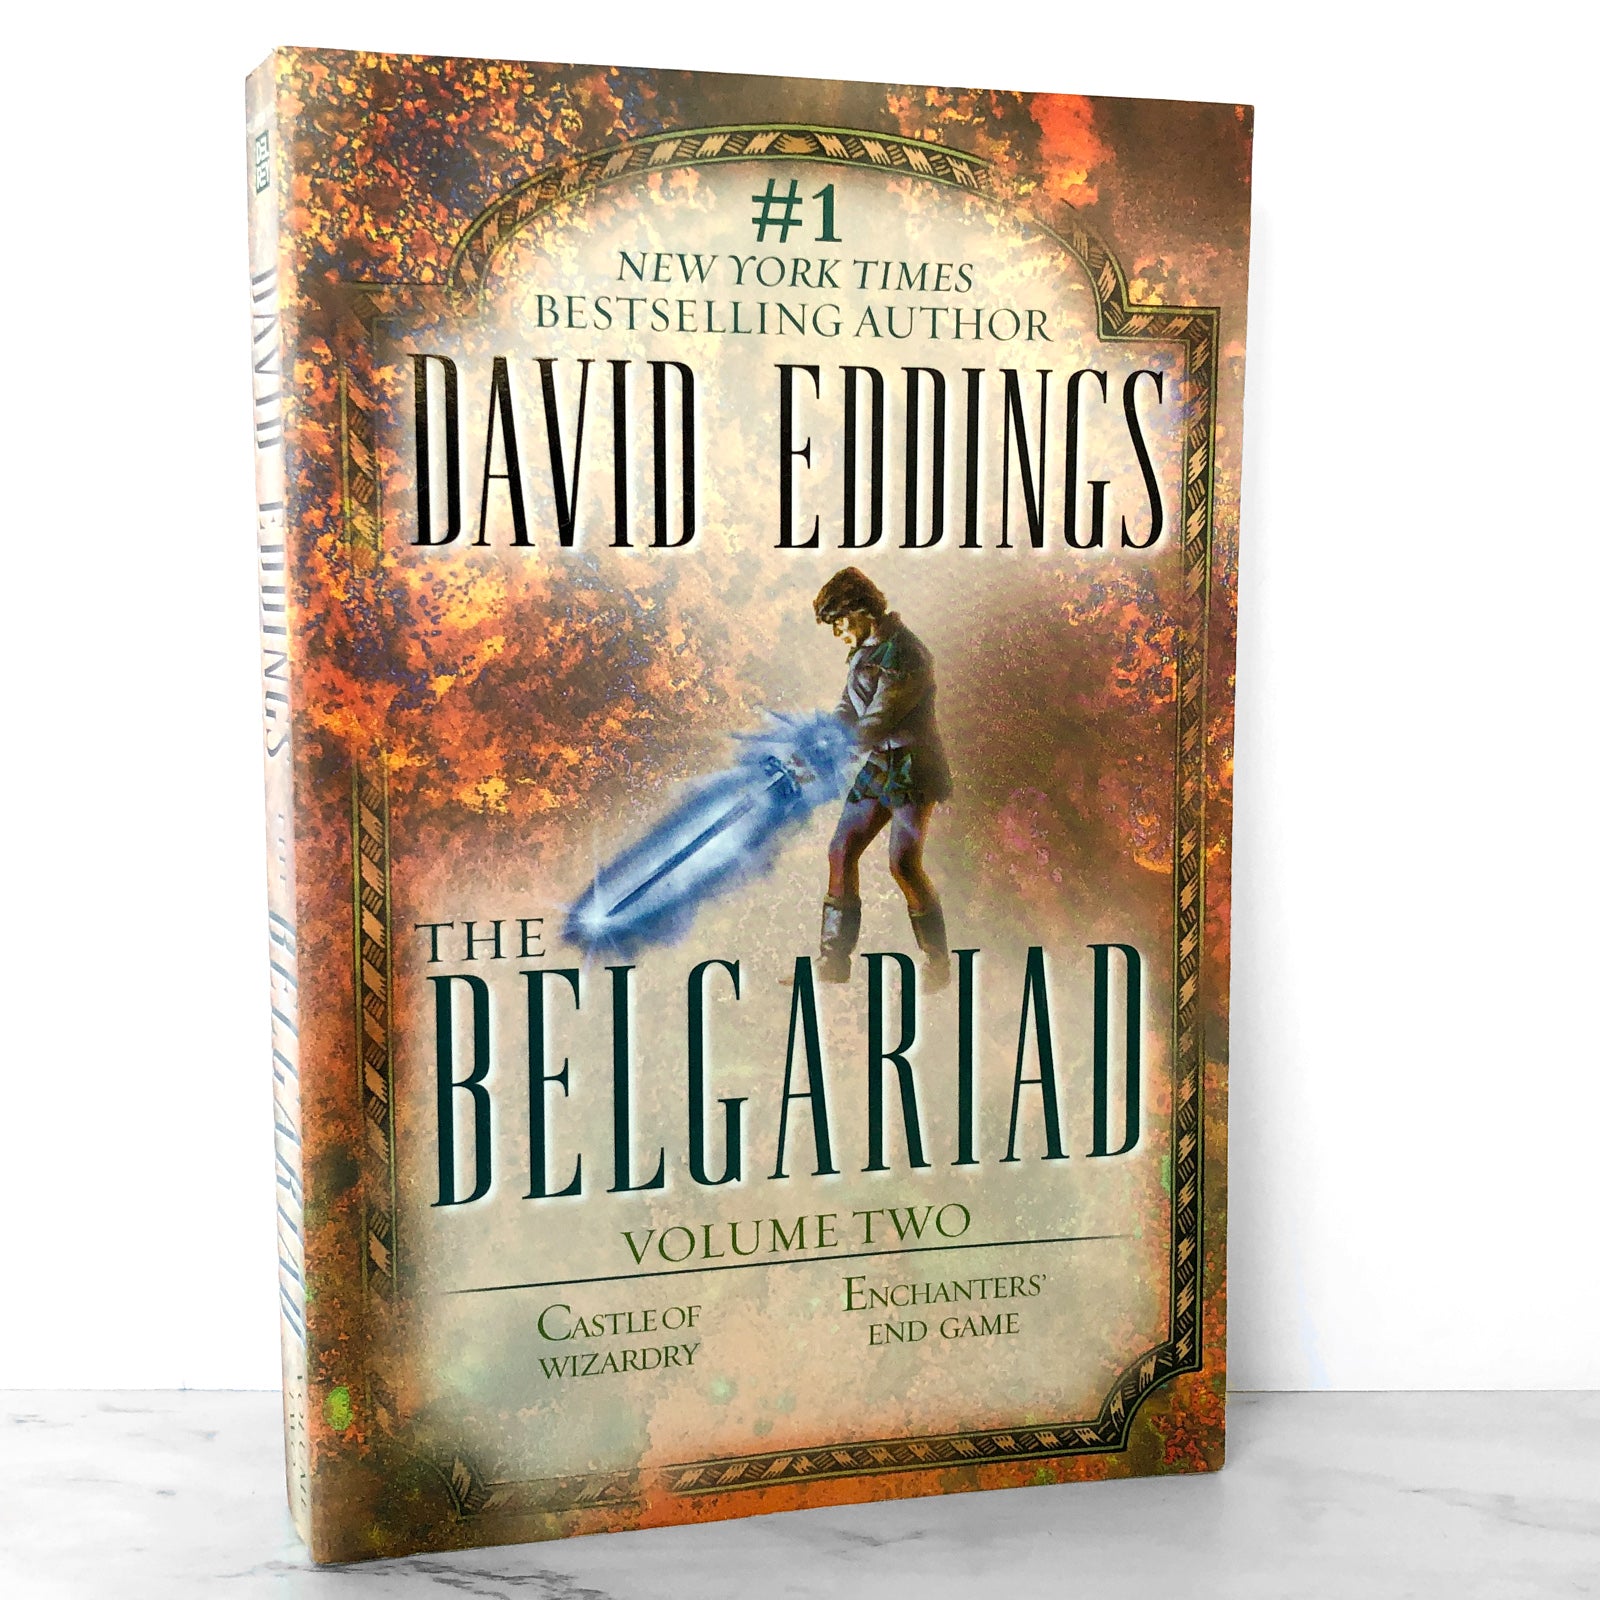 The Belgariad Series 5 Books Collection Set by David Eddings